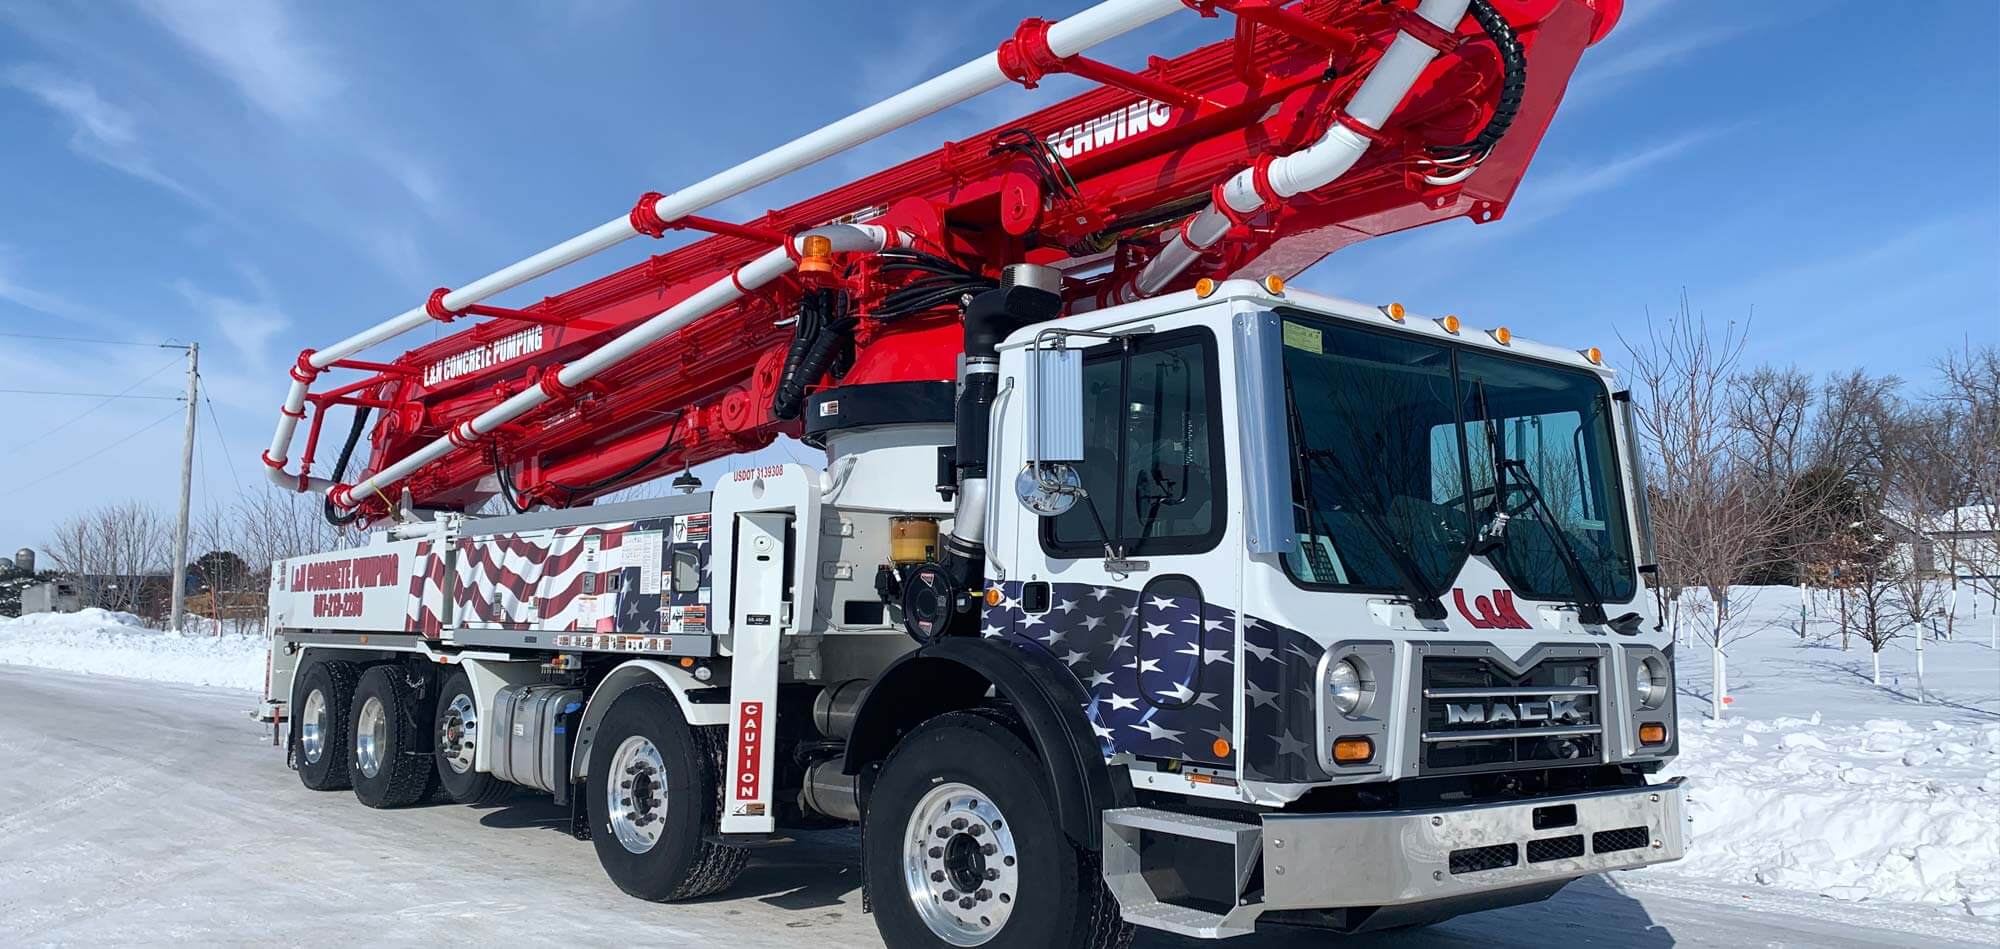 New Concrete Pump Truck with an American Flag design owned by L&N Concrete Pumping with a Schwing Concrete Placing Boom